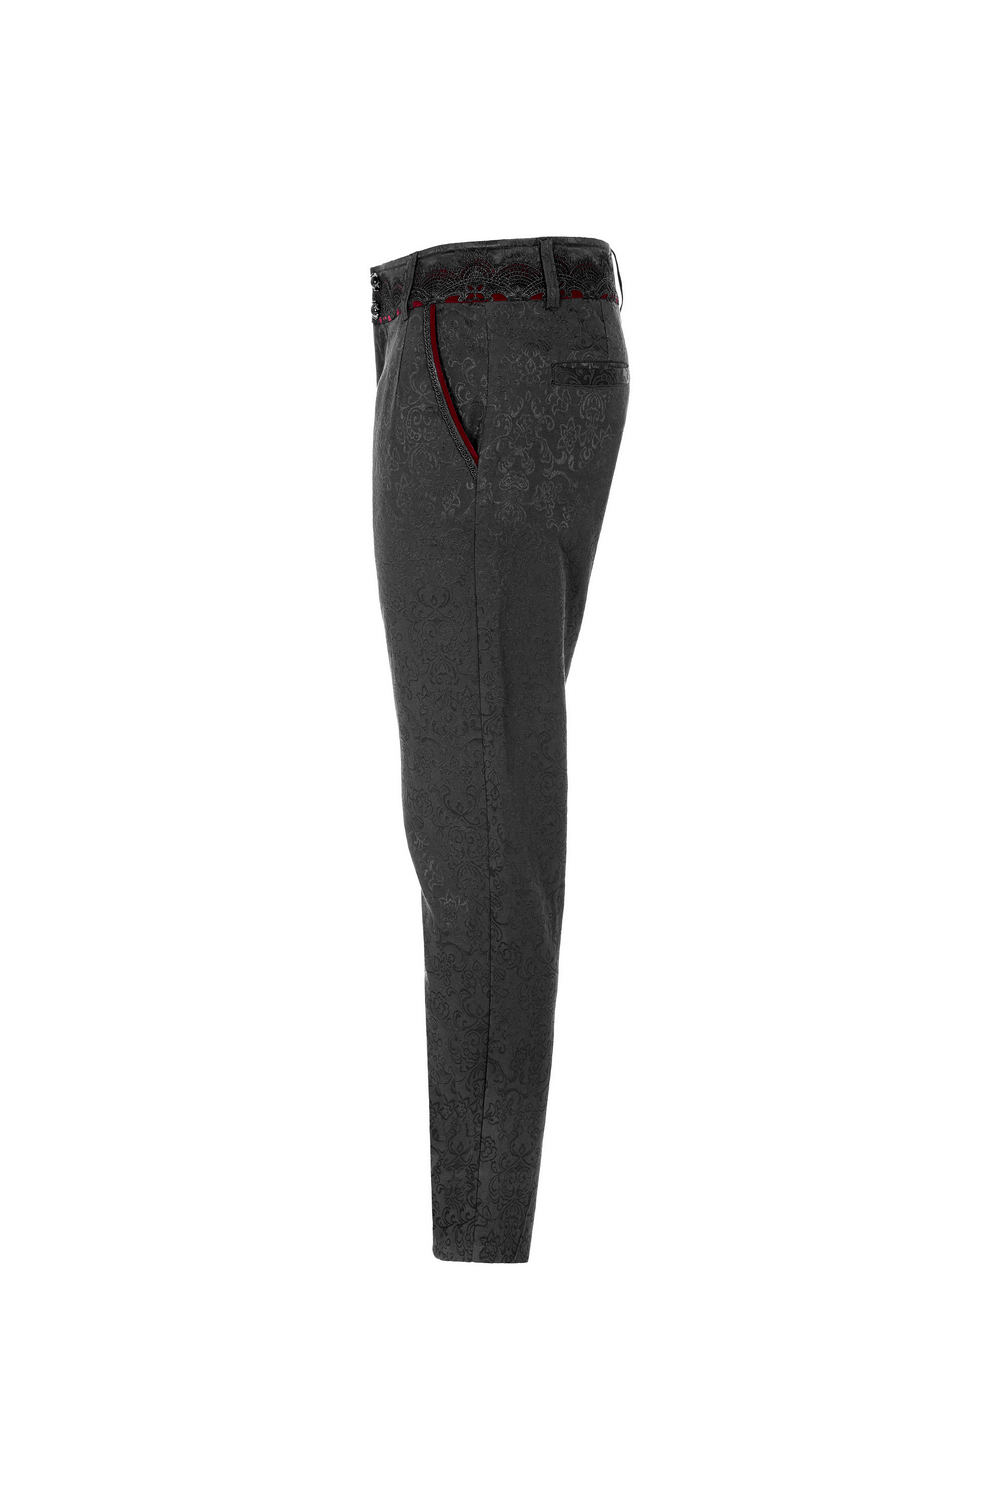 Gothic Jacquard Lace Pants with Metal Buttons